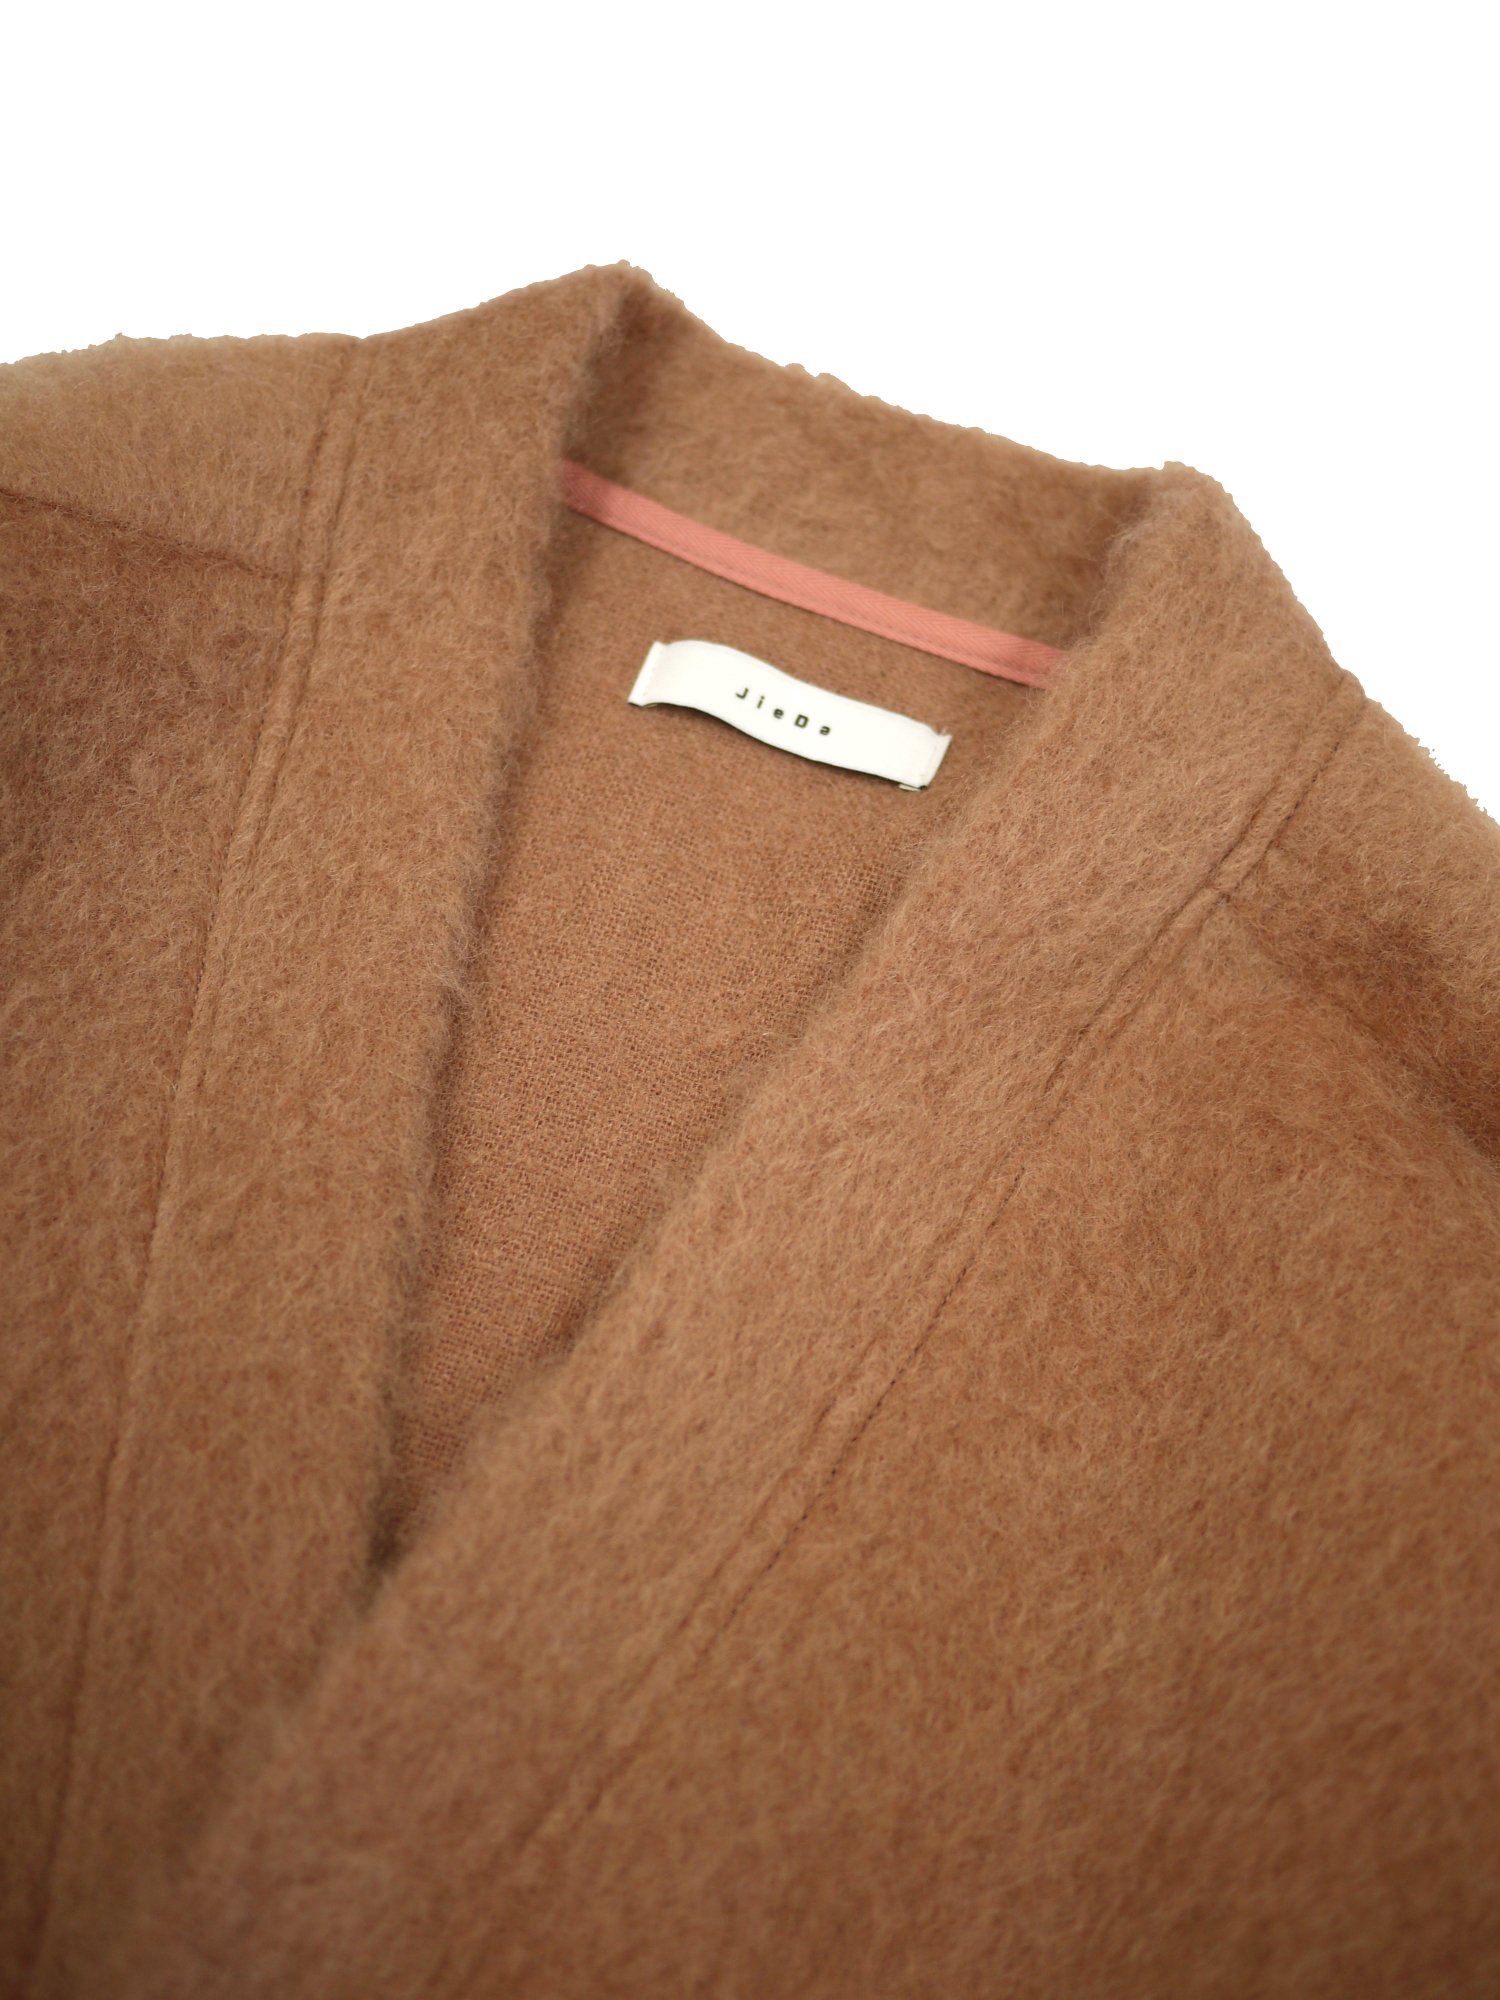 JieDa<br />MOHAIR CARDIGAN / PINK BEIGE<img class='new_mark_img2' src='https://img.shop-pro.jp/img/new/icons14.gif' style='border:none;display:inline;margin:0px;padding:0px;width:auto;' />